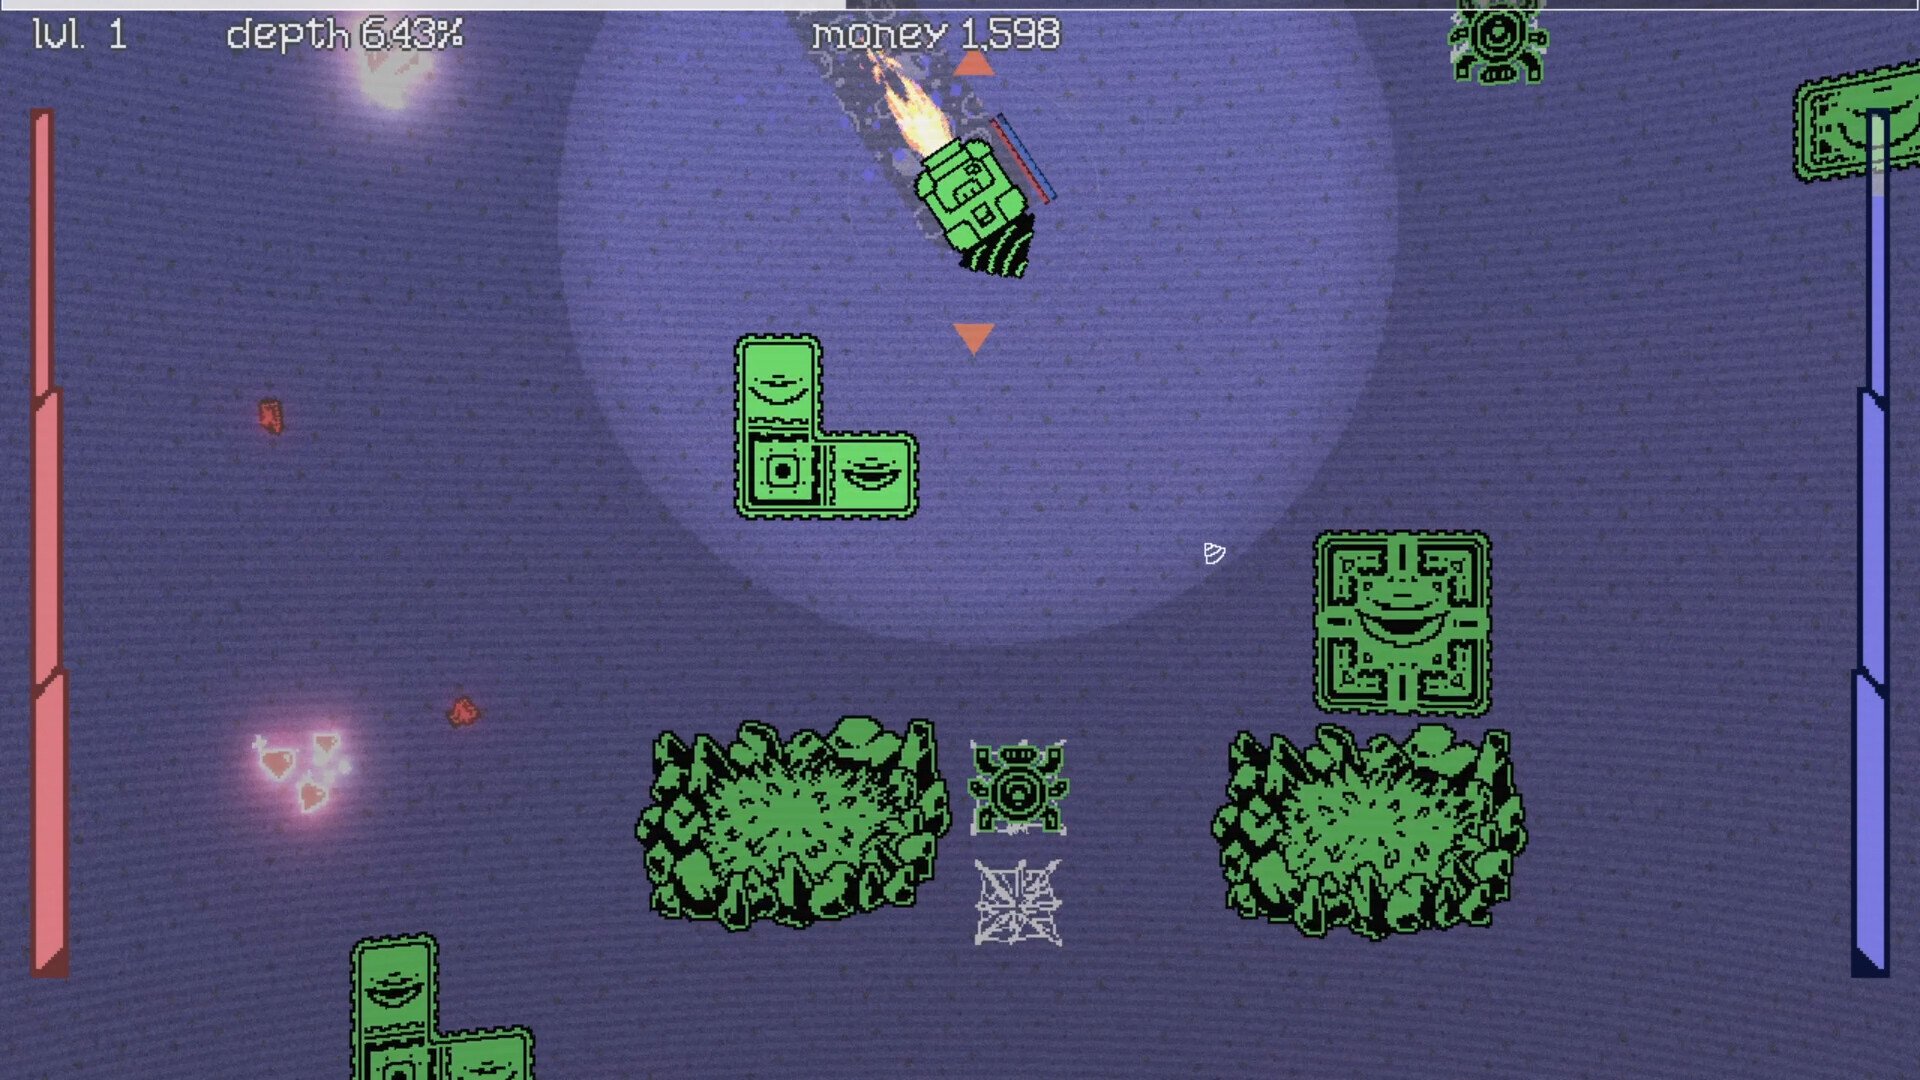 A missile like projectile firing at different targets. image is from game GemCore.